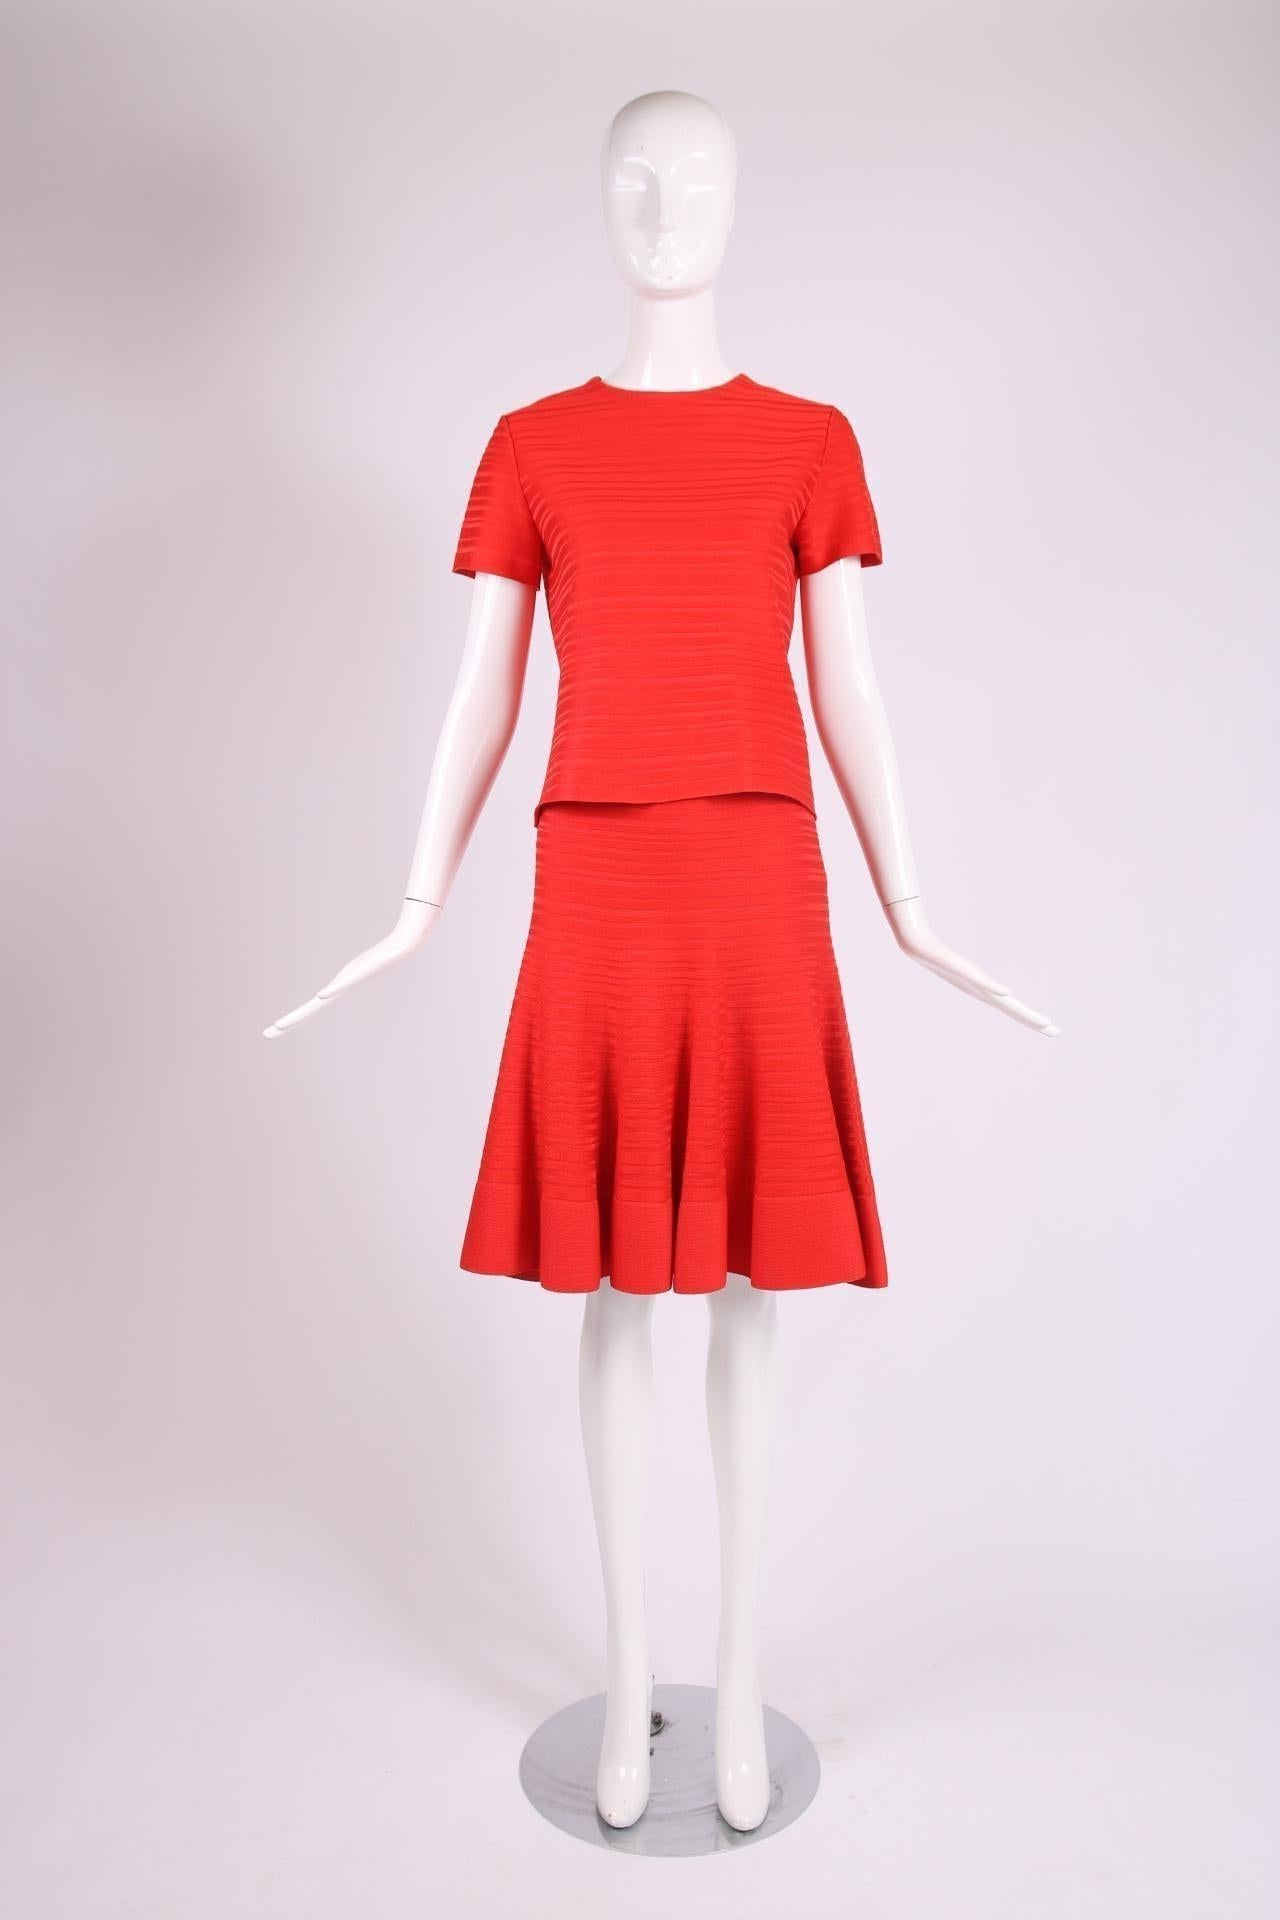 Christian Dior red ribbed, stretch crop top & flared skirt ensemble. Fabric is a silk blend - both are size tag 8. In excellent condition. Please consult measurements.

Top
Shoulders - 16